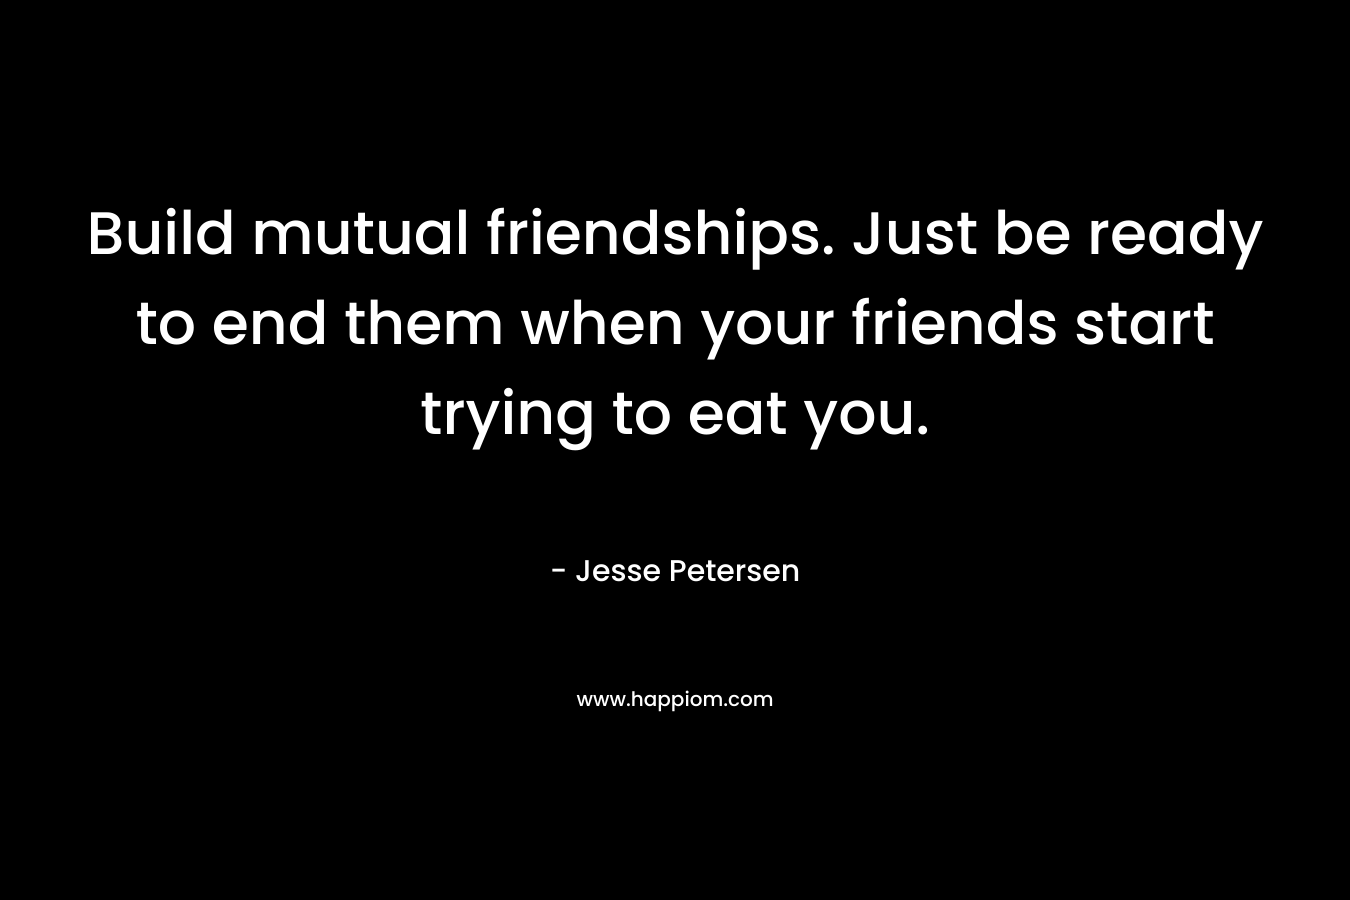 Build mutual friendships. Just be ready to end them when your friends start trying to eat you. – Jesse Petersen